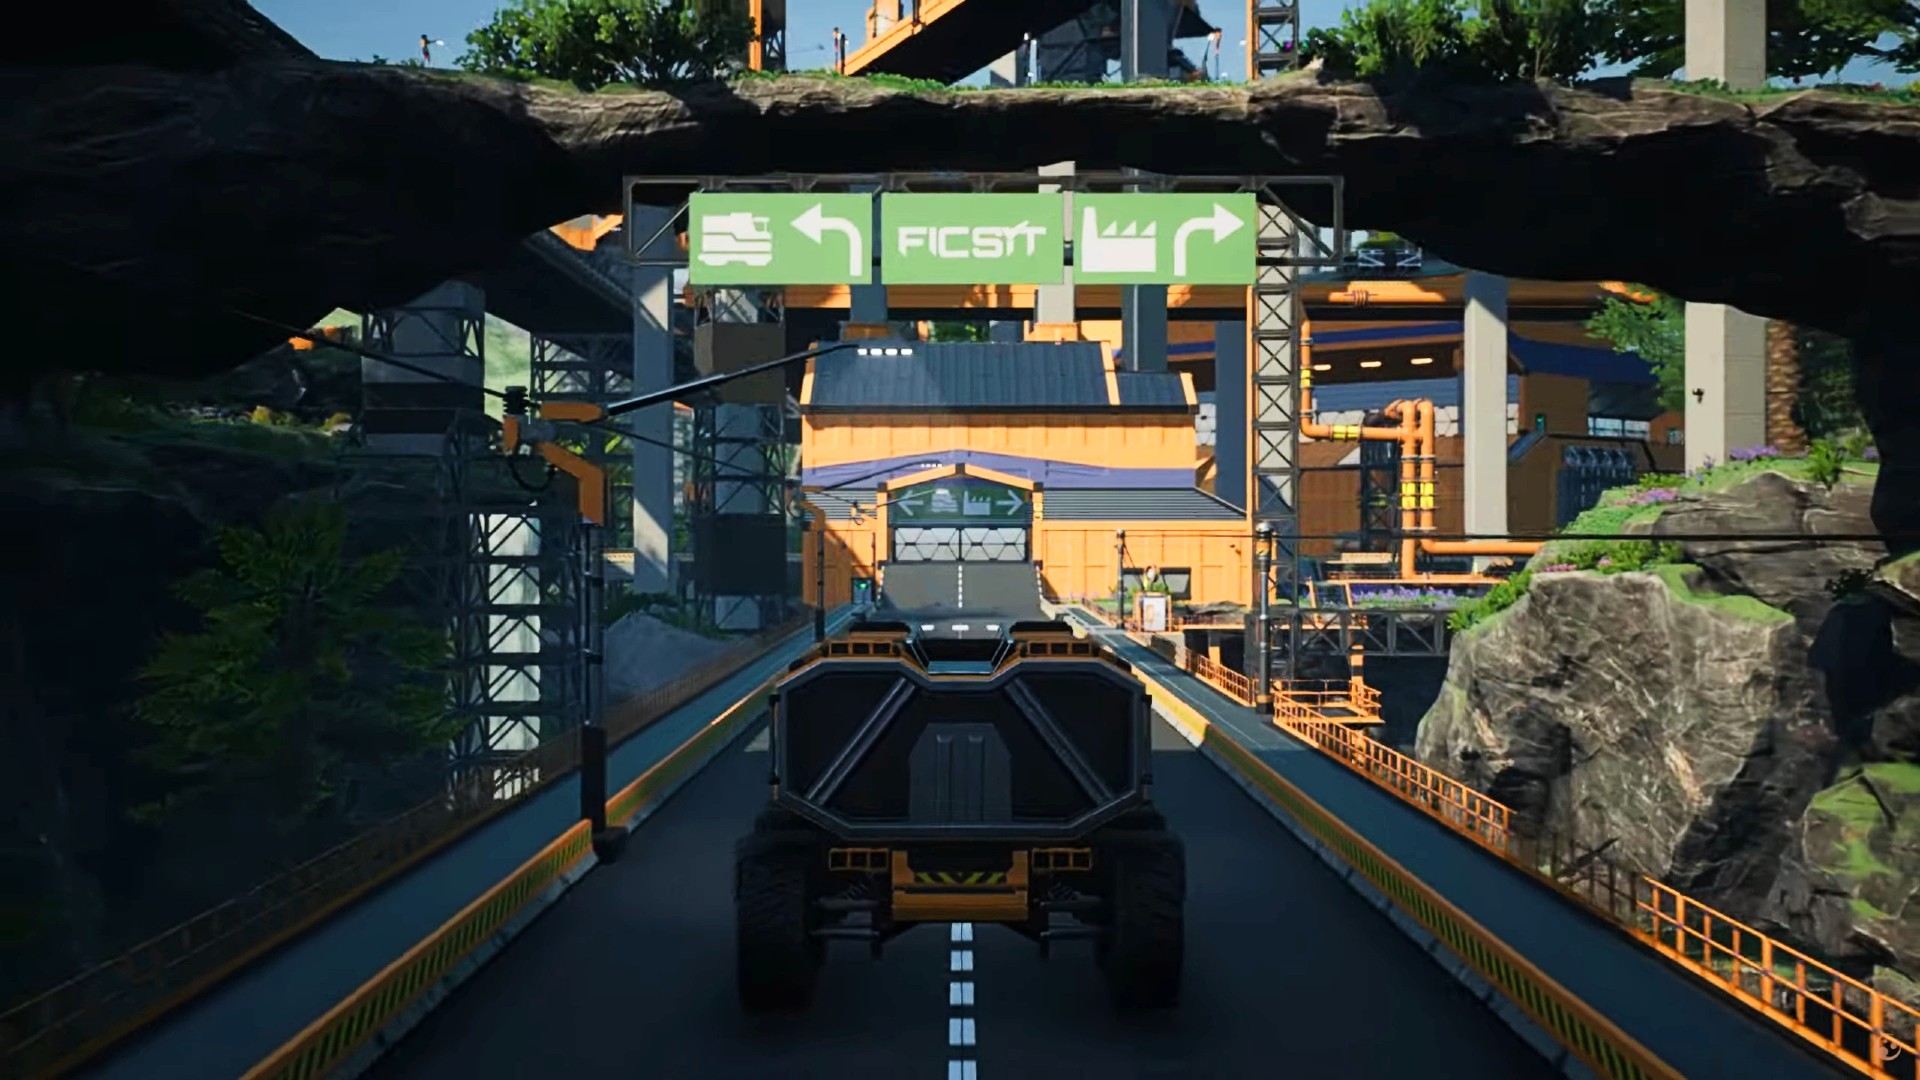 Satisfactory's Update 5 adds new signs, signals, and dedicated servers